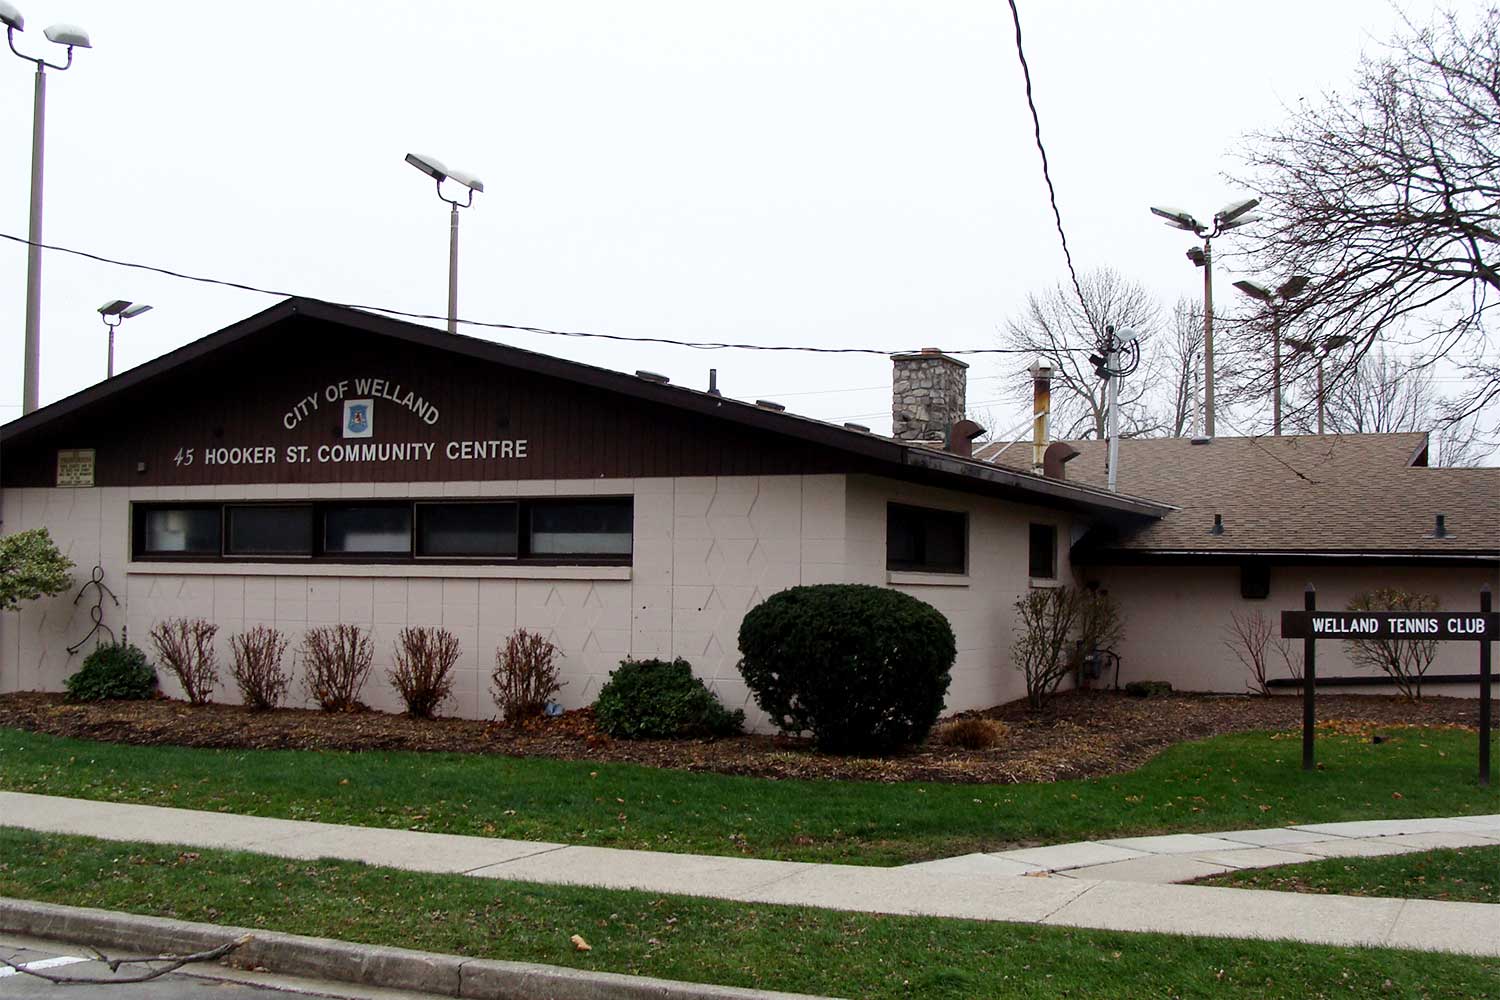 image of the Community Centre